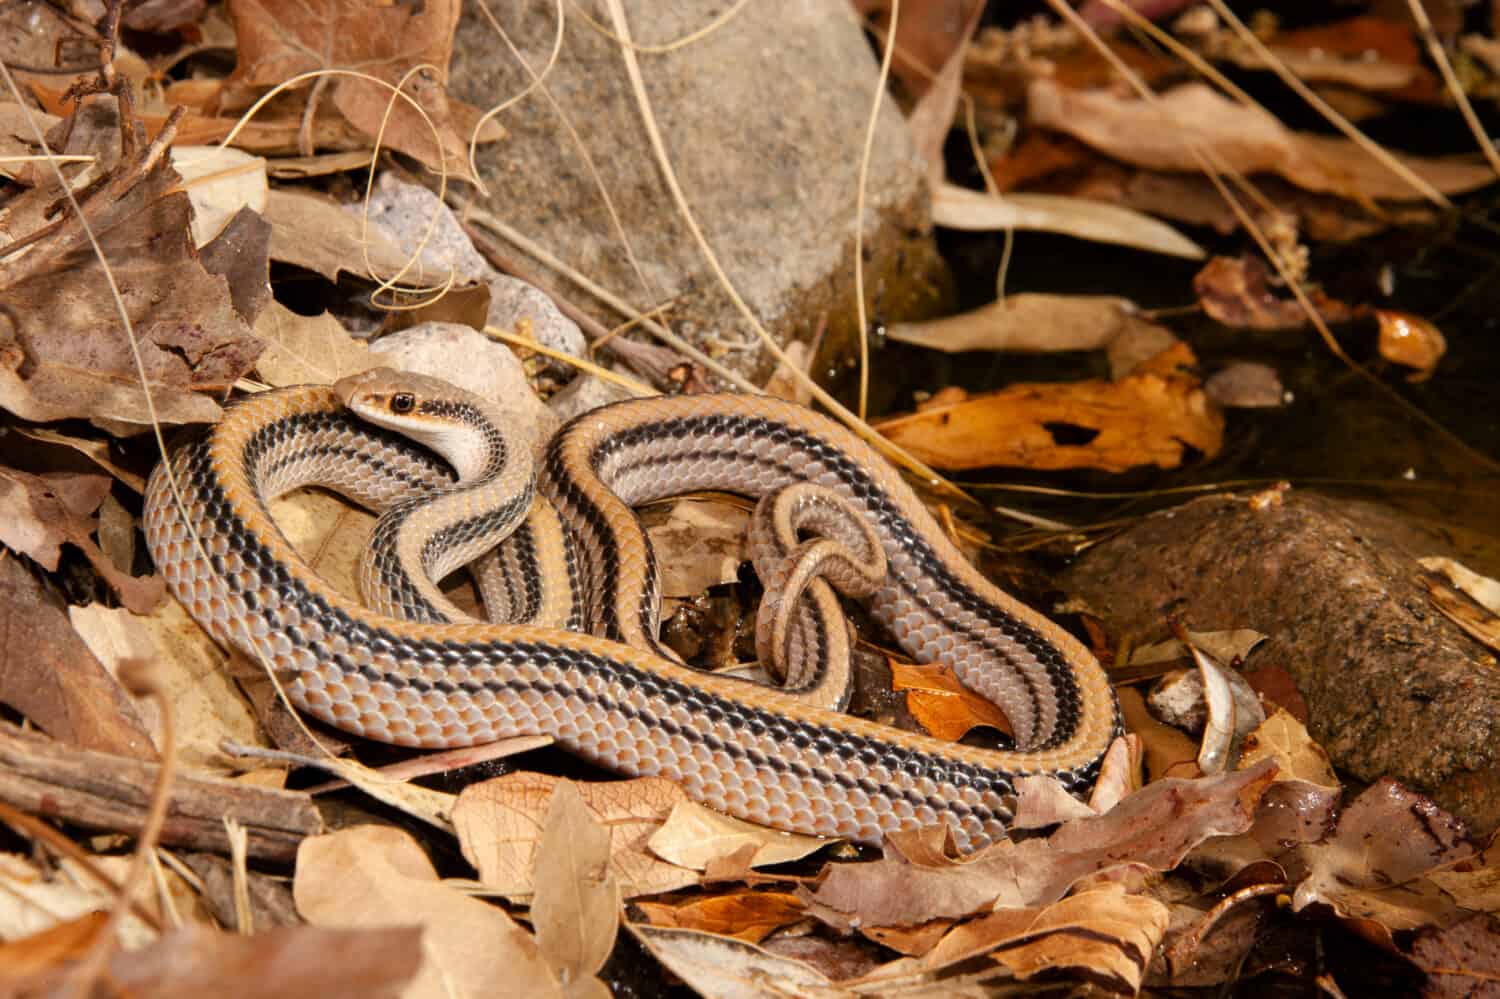 Western Patch-nosed Snake, Salvadora hexalepis,  Arizona, United States